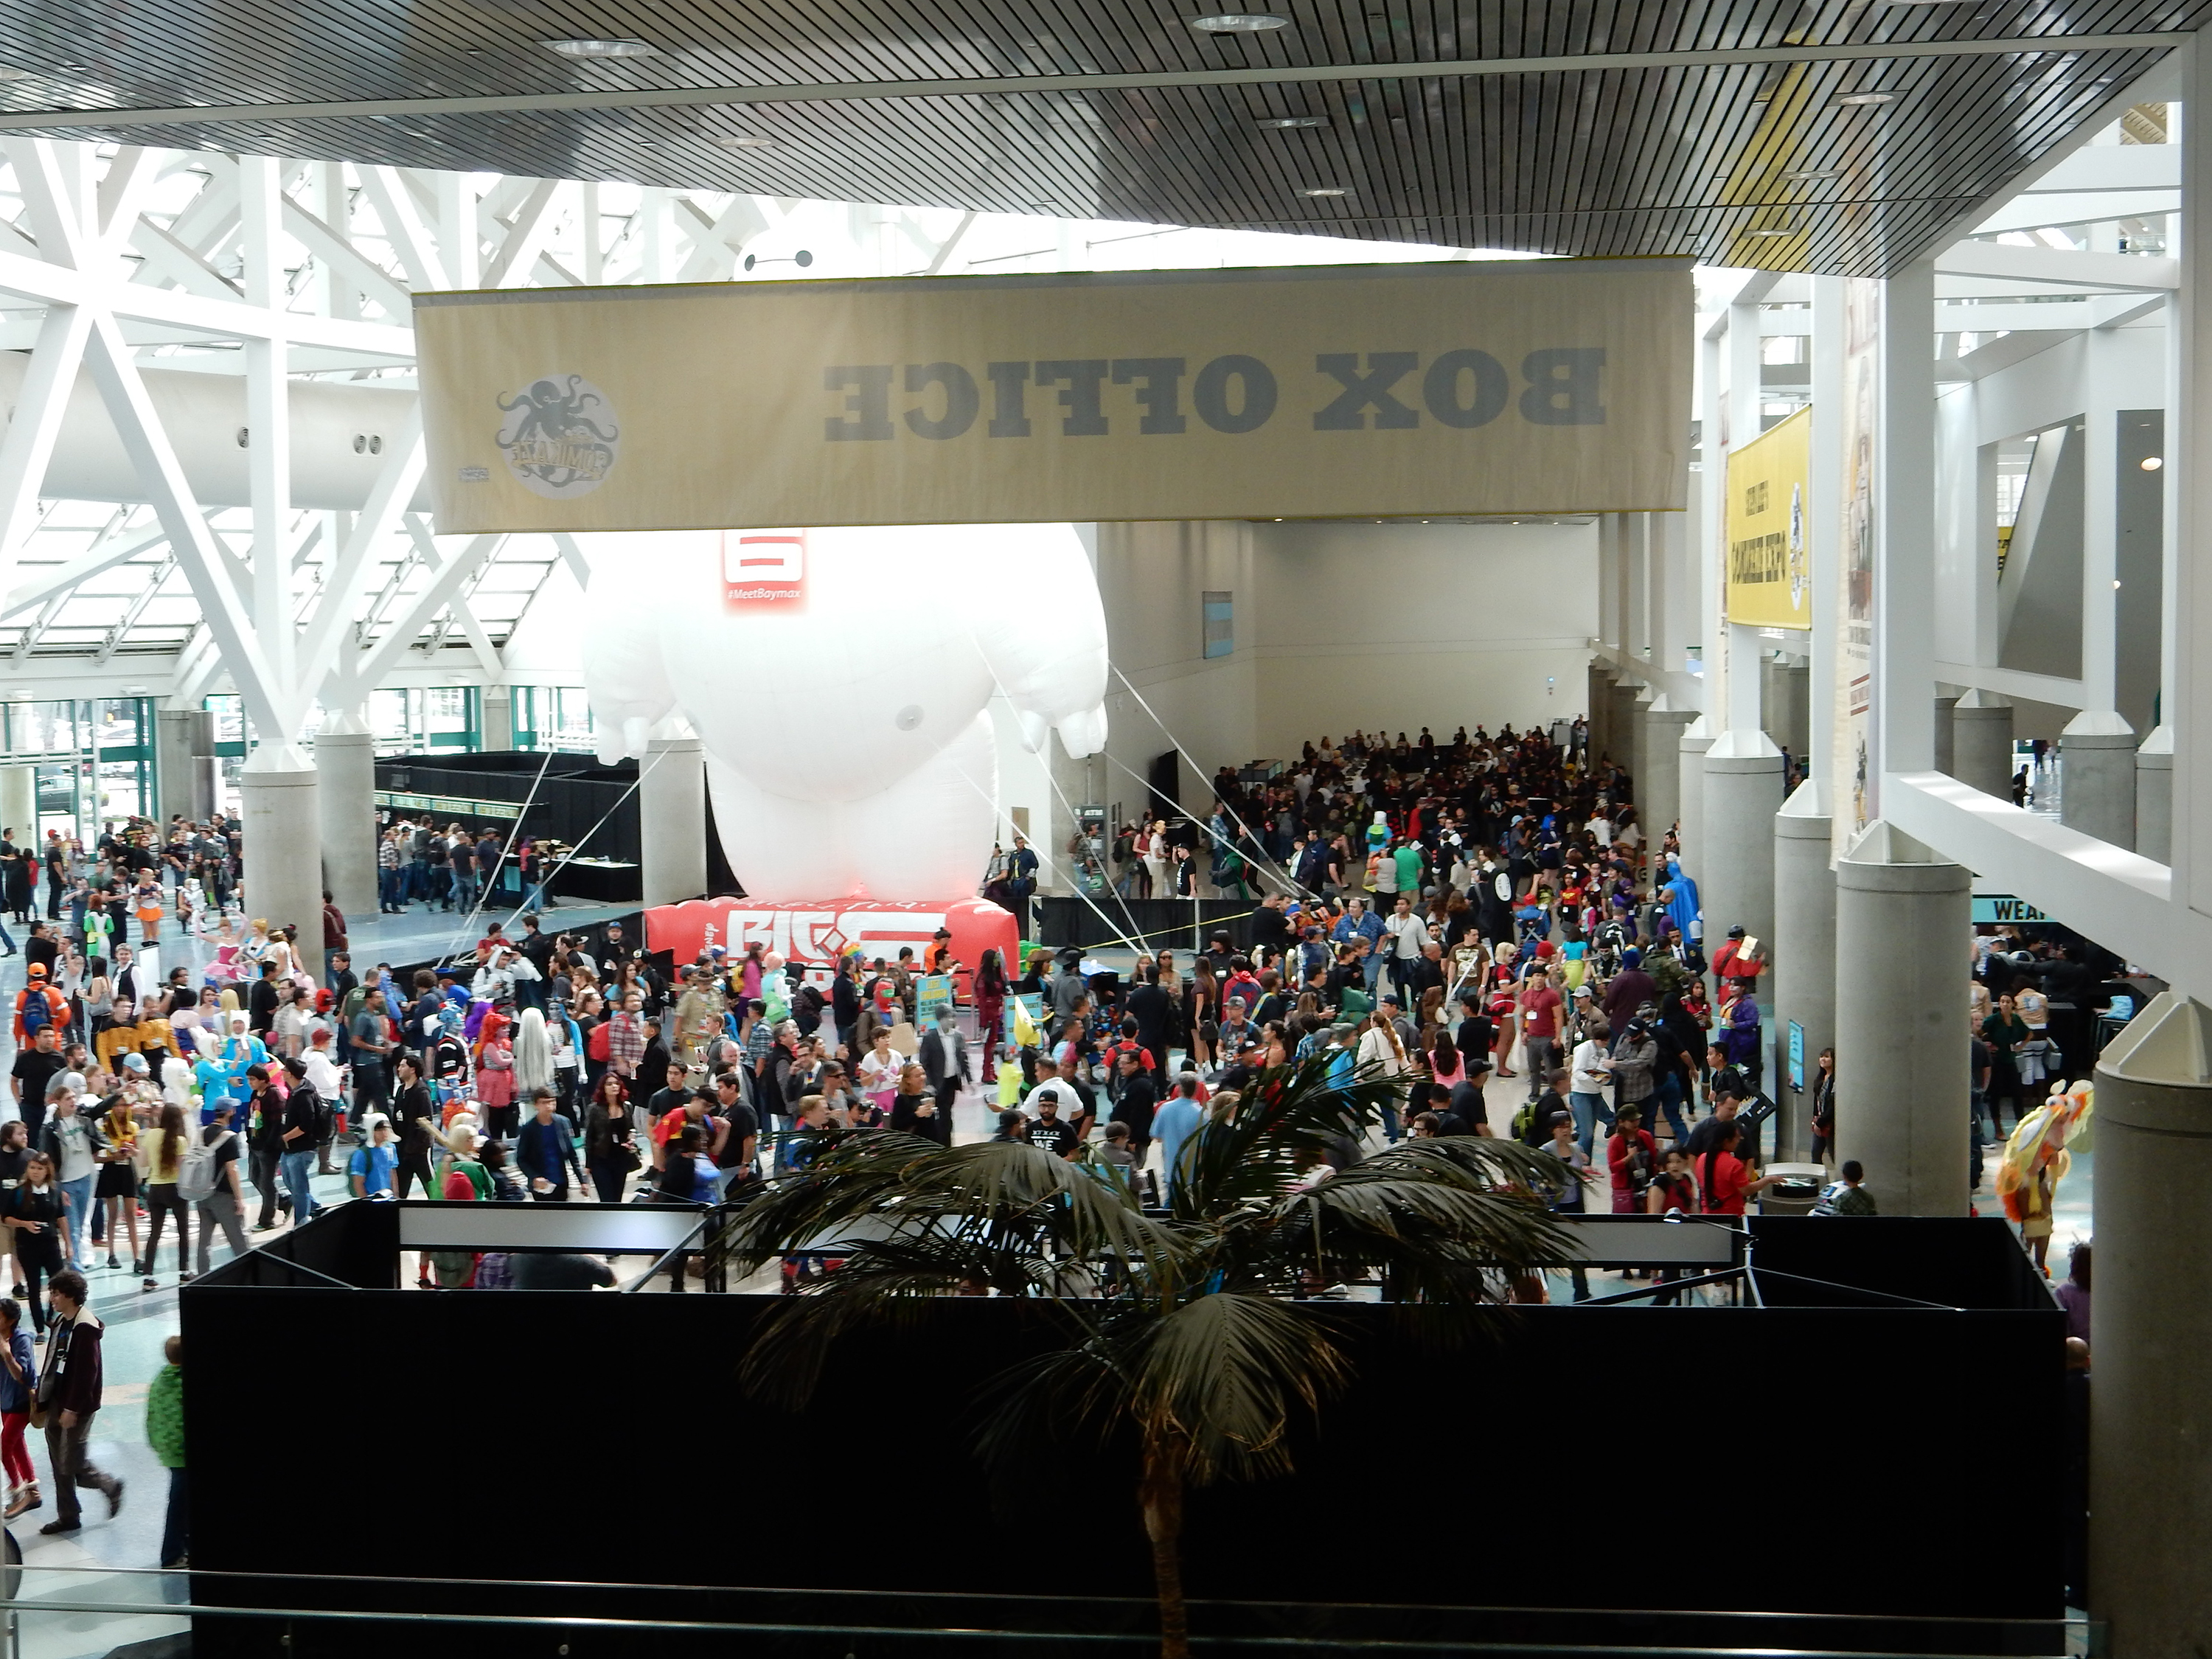 Morning crowd on Saturday in the Los Angeles Convention Center for Comikaze.  Photo by William Walbourne of Syrenia Imagery.